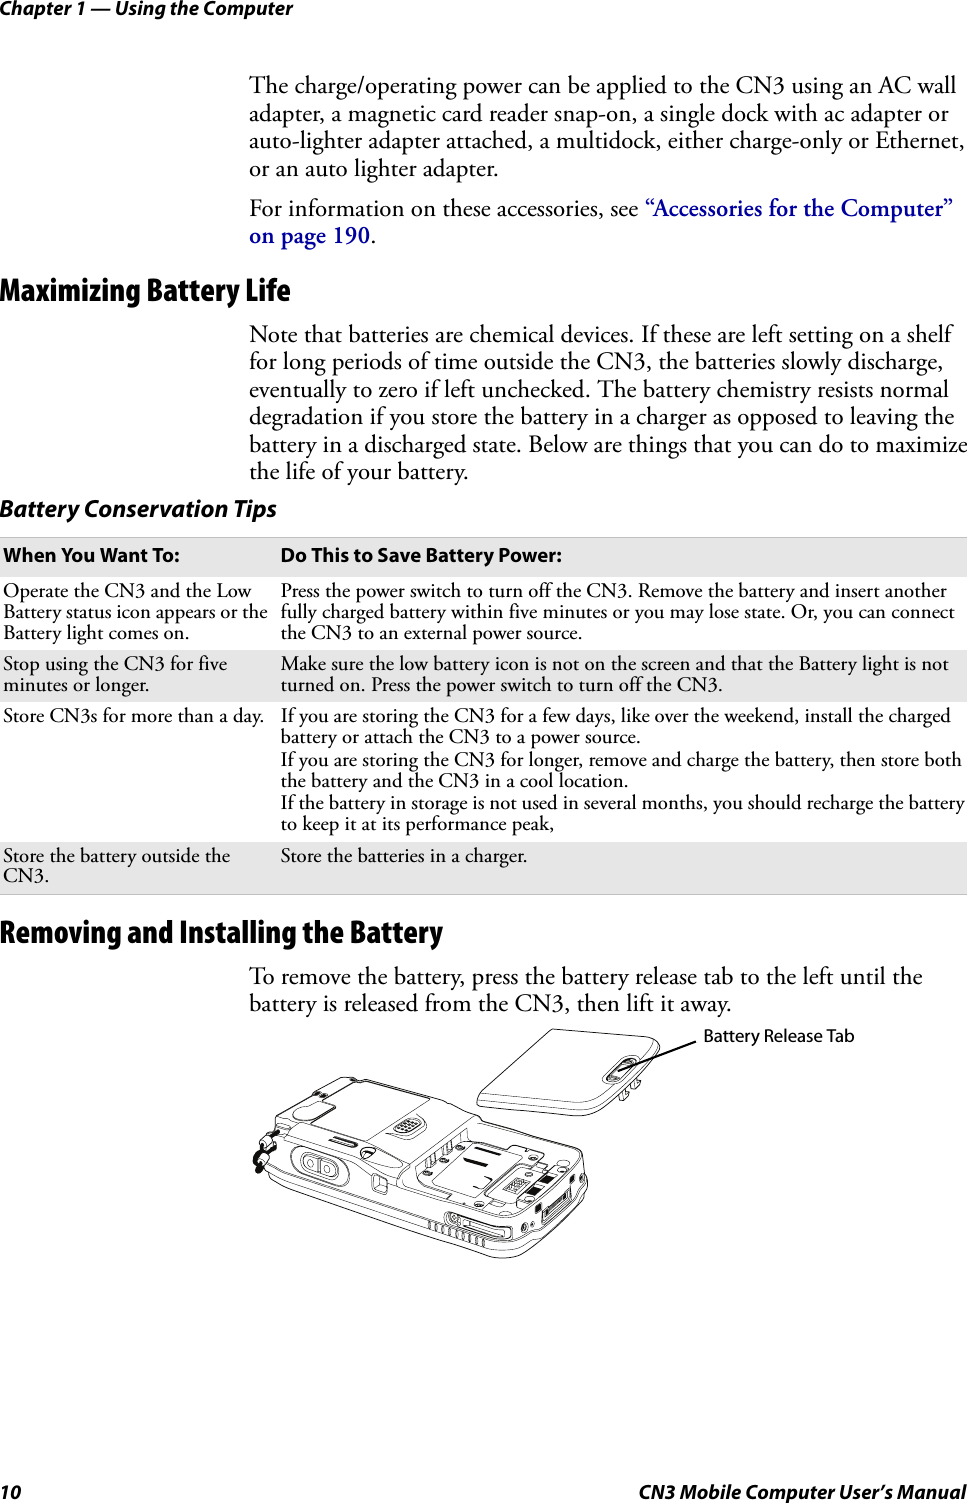 Chapter 1 — Using the Computer10 CN3 Mobile Computer User’s ManualThe charge/operating power can be applied to the CN3 using an AC wall adapter, a magnetic card reader snap-on, a single dock with ac adapter or auto-lighter adapter attached, a multidock, either charge-only or Ethernet, or an auto lighter adapter. For information on these accessories, see “Accessories for the Computer” on page 190.Maximizing Battery LifeNote that batteries are chemical devices. If these are left setting on a shelf for long periods of time outside the CN3, the batteries slowly discharge, eventually to zero if left unchecked. The battery chemistry resists normal degradation if you store the battery in a charger as opposed to leaving the battery in a discharged state. Below are things that you can do to maximize the life of your battery.Removing and Installing the BatteryTo remove the battery, press the battery release tab to the left until the battery is released from the CN3, then lift it away.Battery Conservation TipsWhen You Want To: Do This to Save Battery Power:Operate the CN3 and the Low Battery status icon appears or the Battery light comes on.Press the power switch to turn off the CN3. Remove the battery and insert another fully charged battery within five minutes or you may lose state. Or, you can connect the CN3 to an external power source.Stop using the CN3 for five minutes or longer.Make sure the low battery icon is not on the screen and that the Battery light is not turned on. Press the power switch to turn off the CN3.Store CN3s for more than a day. If you are storing the CN3 for a few days, like over the weekend, install the charged battery or attach the CN3 to a power source.If you are storing the CN3 for longer, remove and charge the battery, then store both the battery and the CN3 in a cool location.If the battery in storage is not used in several months, you should recharge the battery to keep it at its performance peak, Store the battery outside the CN3.Store the batteries in a charger.Battery Release Tab